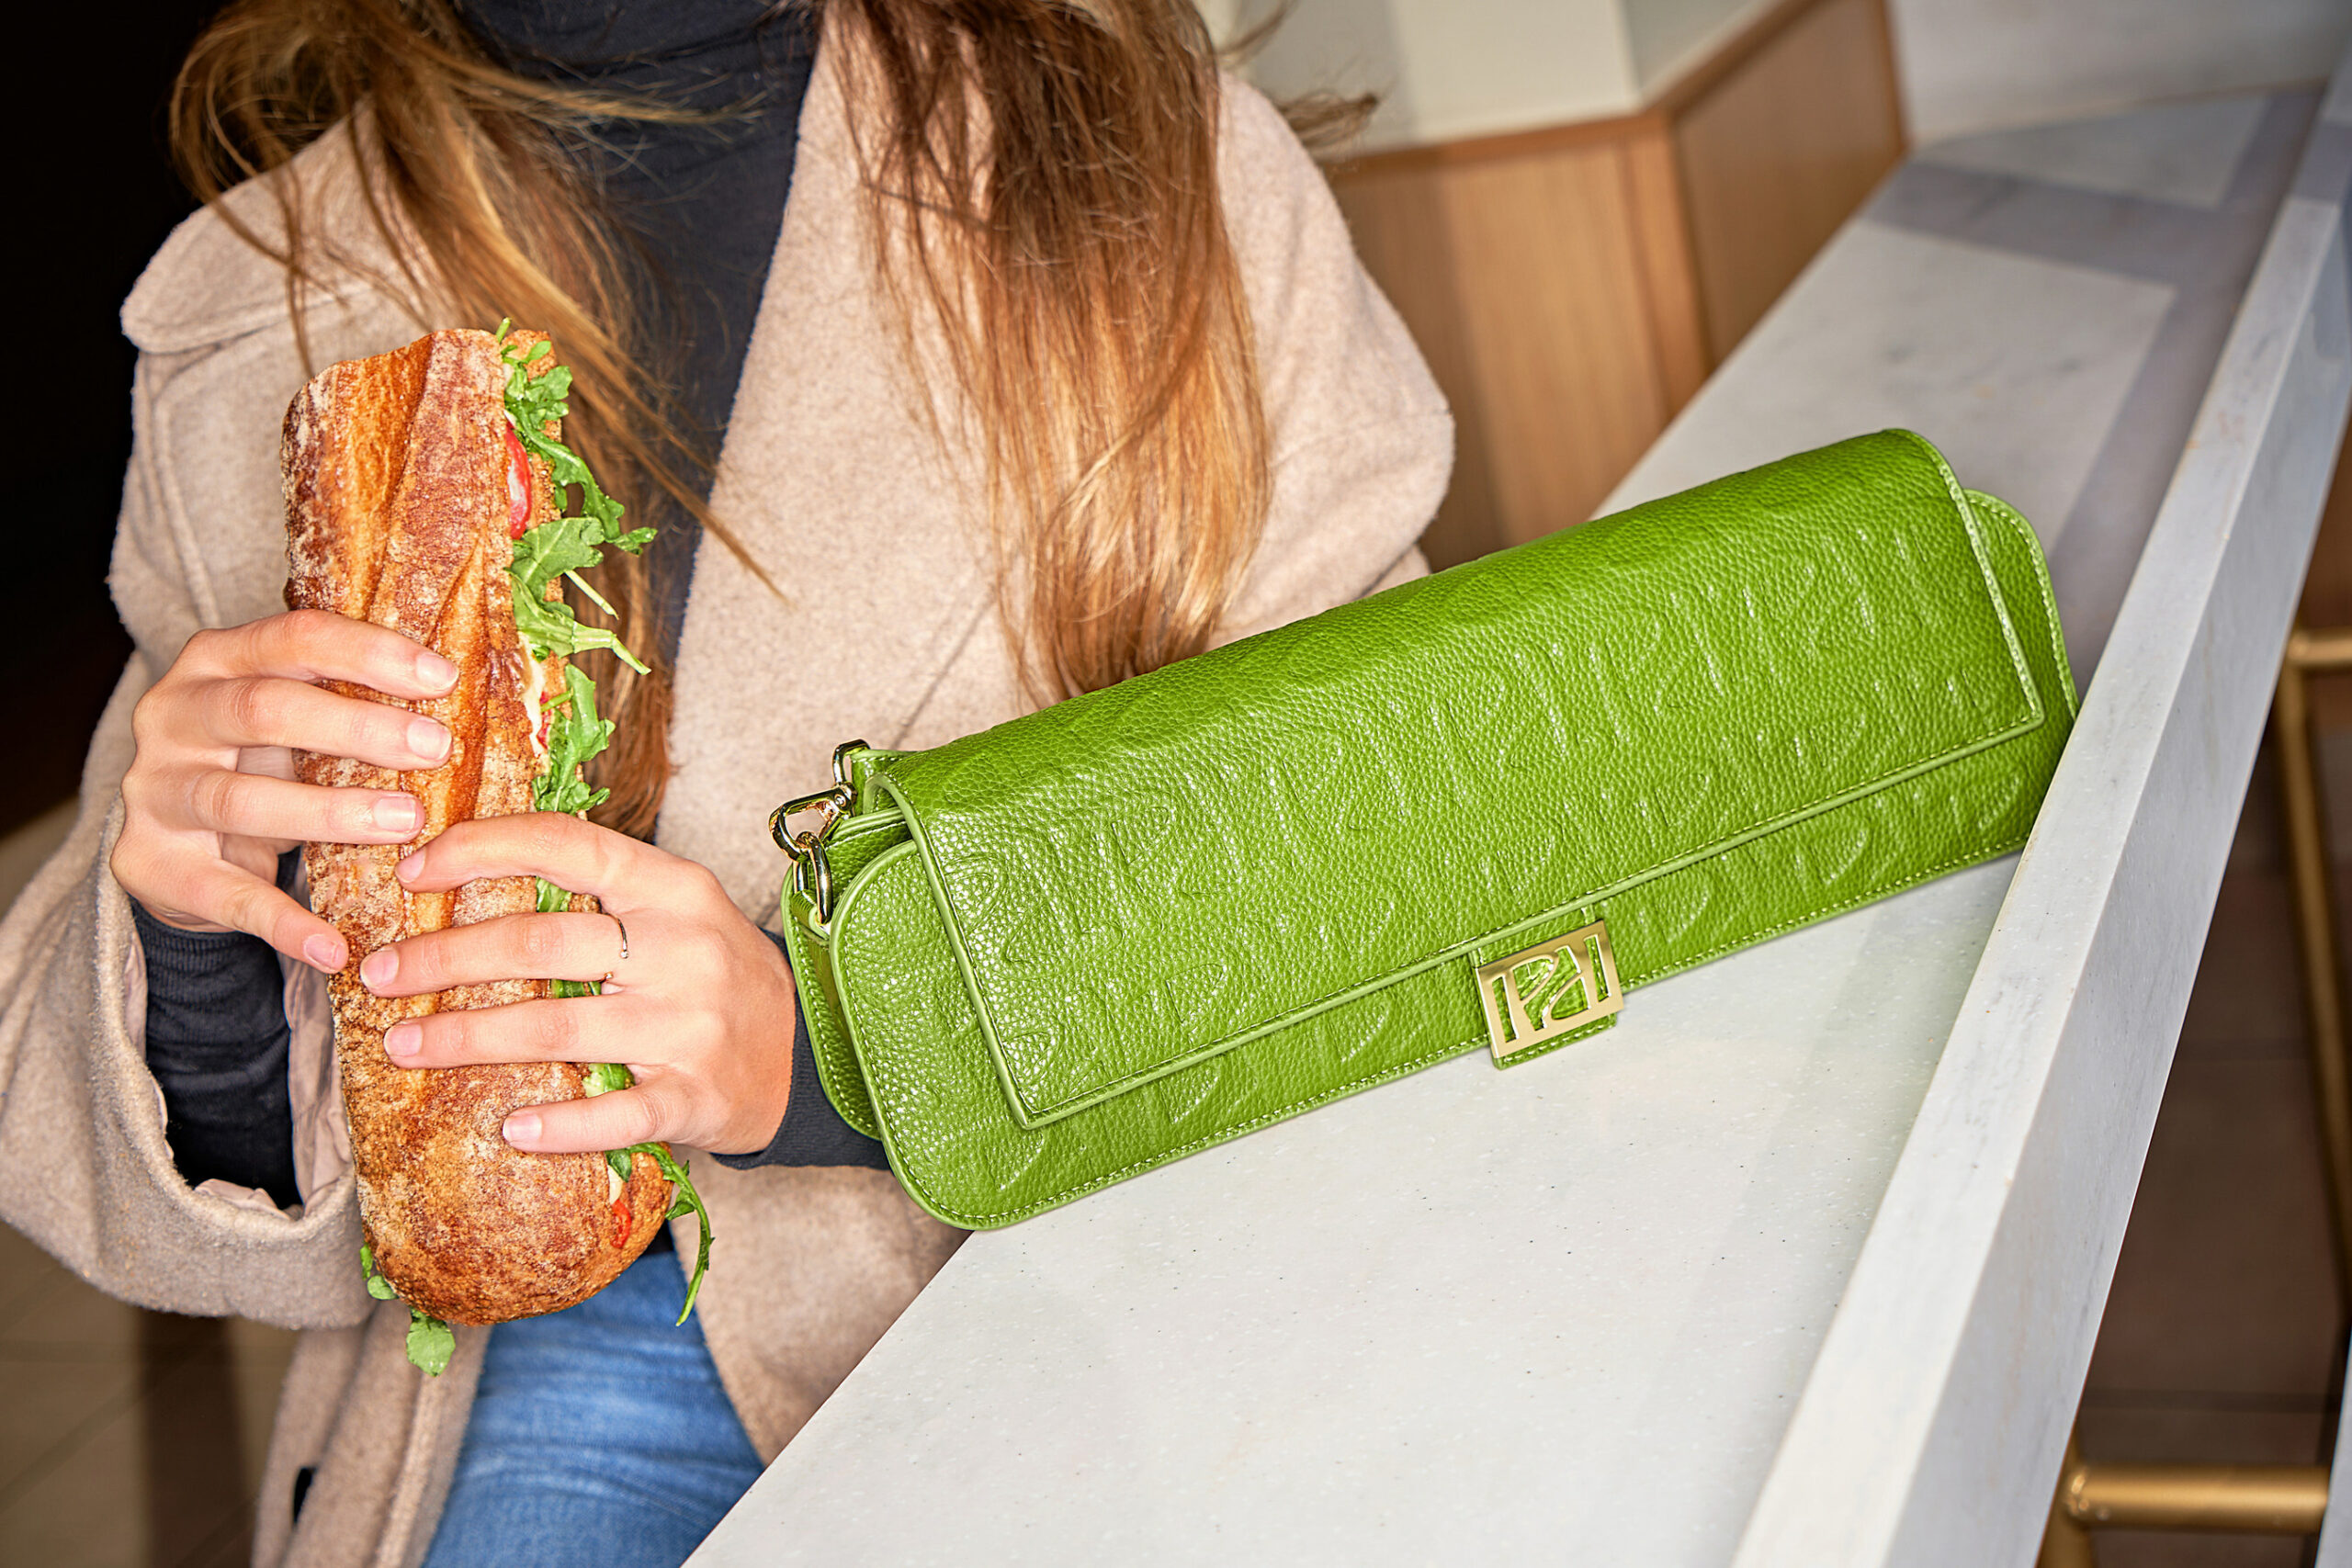 A Panera Bread purse perfectly fits a sub sandwich and is cute for a fashion statement. More food brands are becoming wearable.